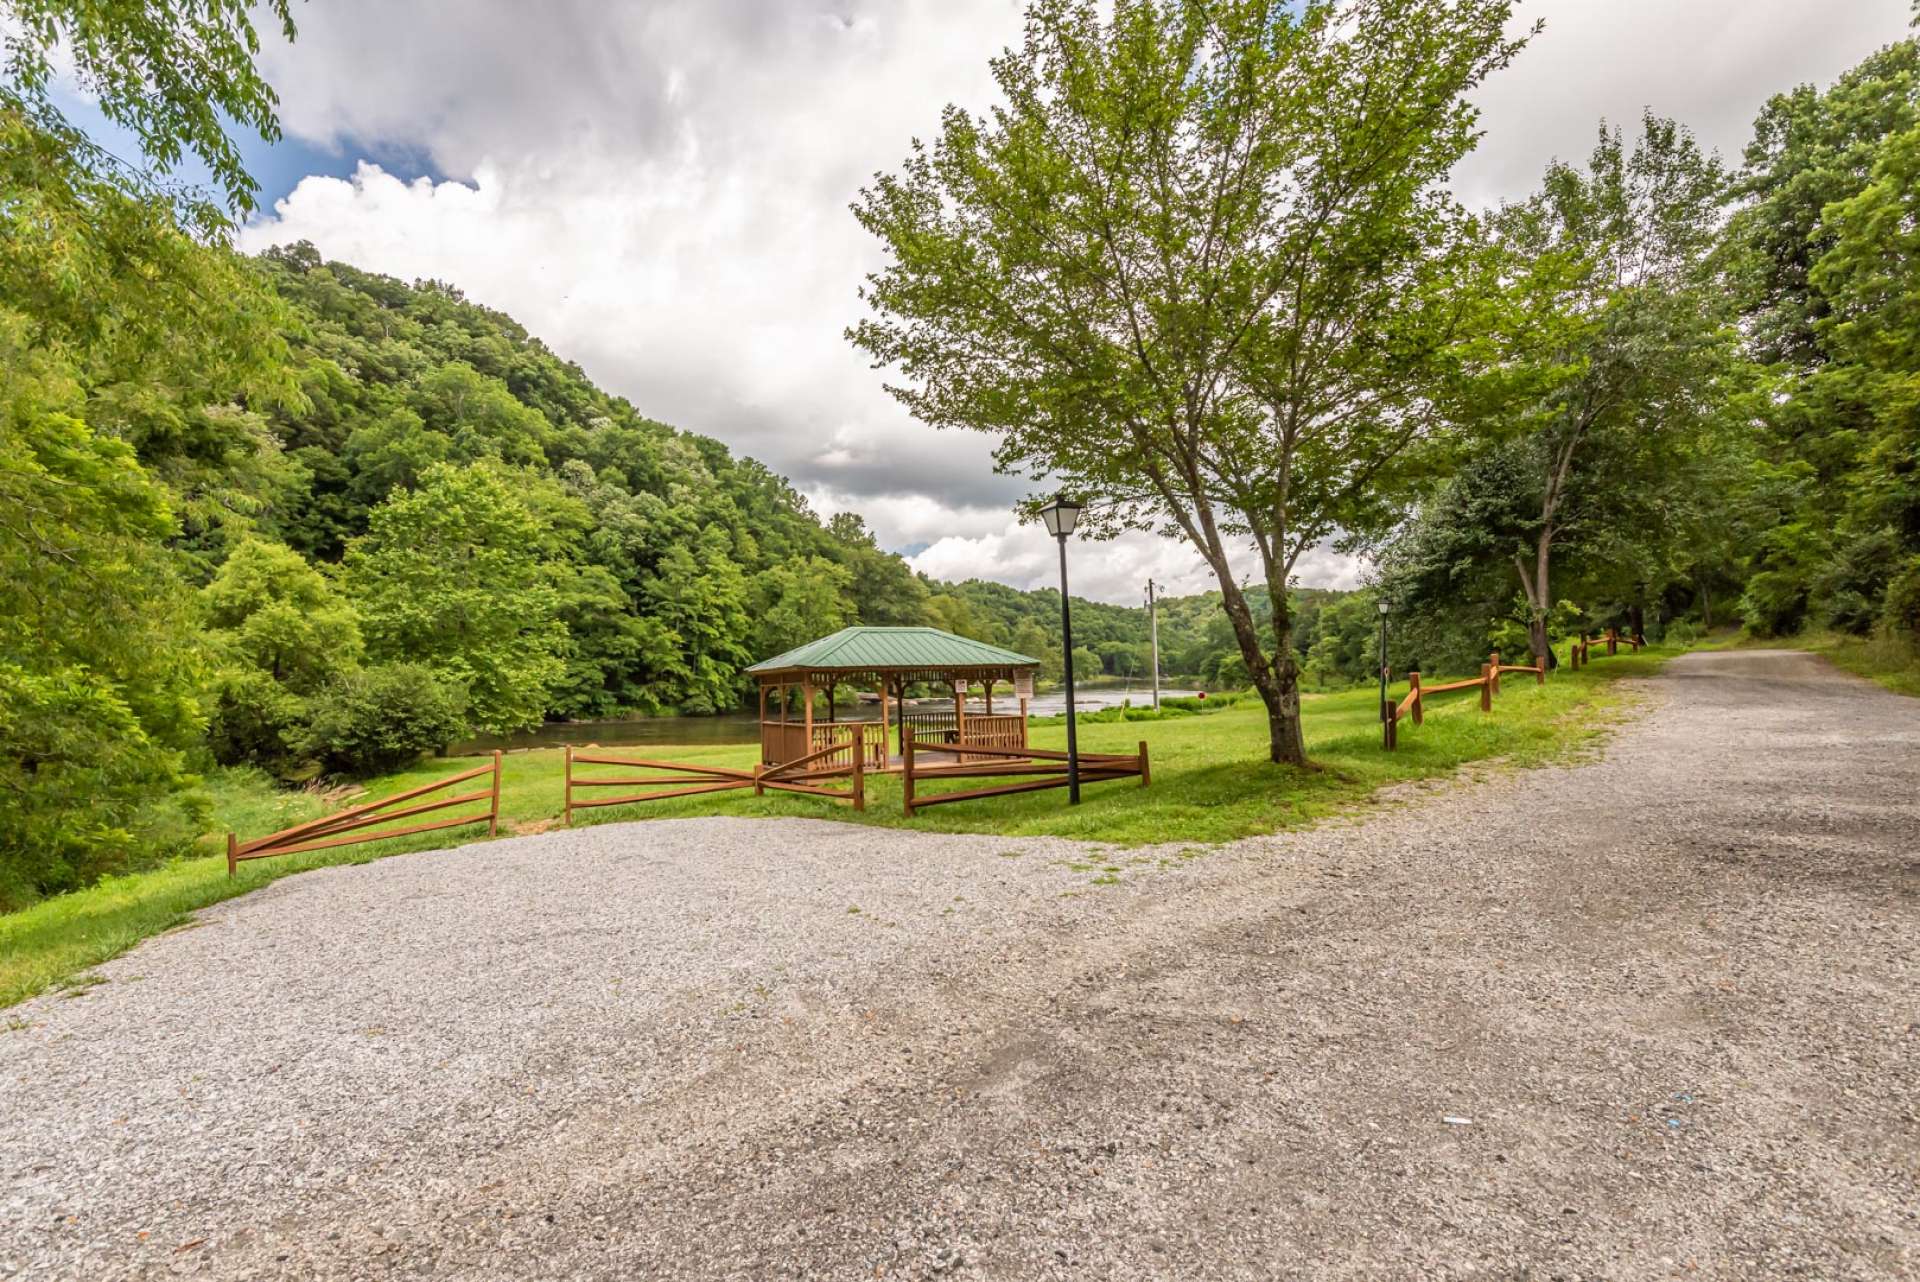 Two River Country offers a common area with pavilion and easy river access.